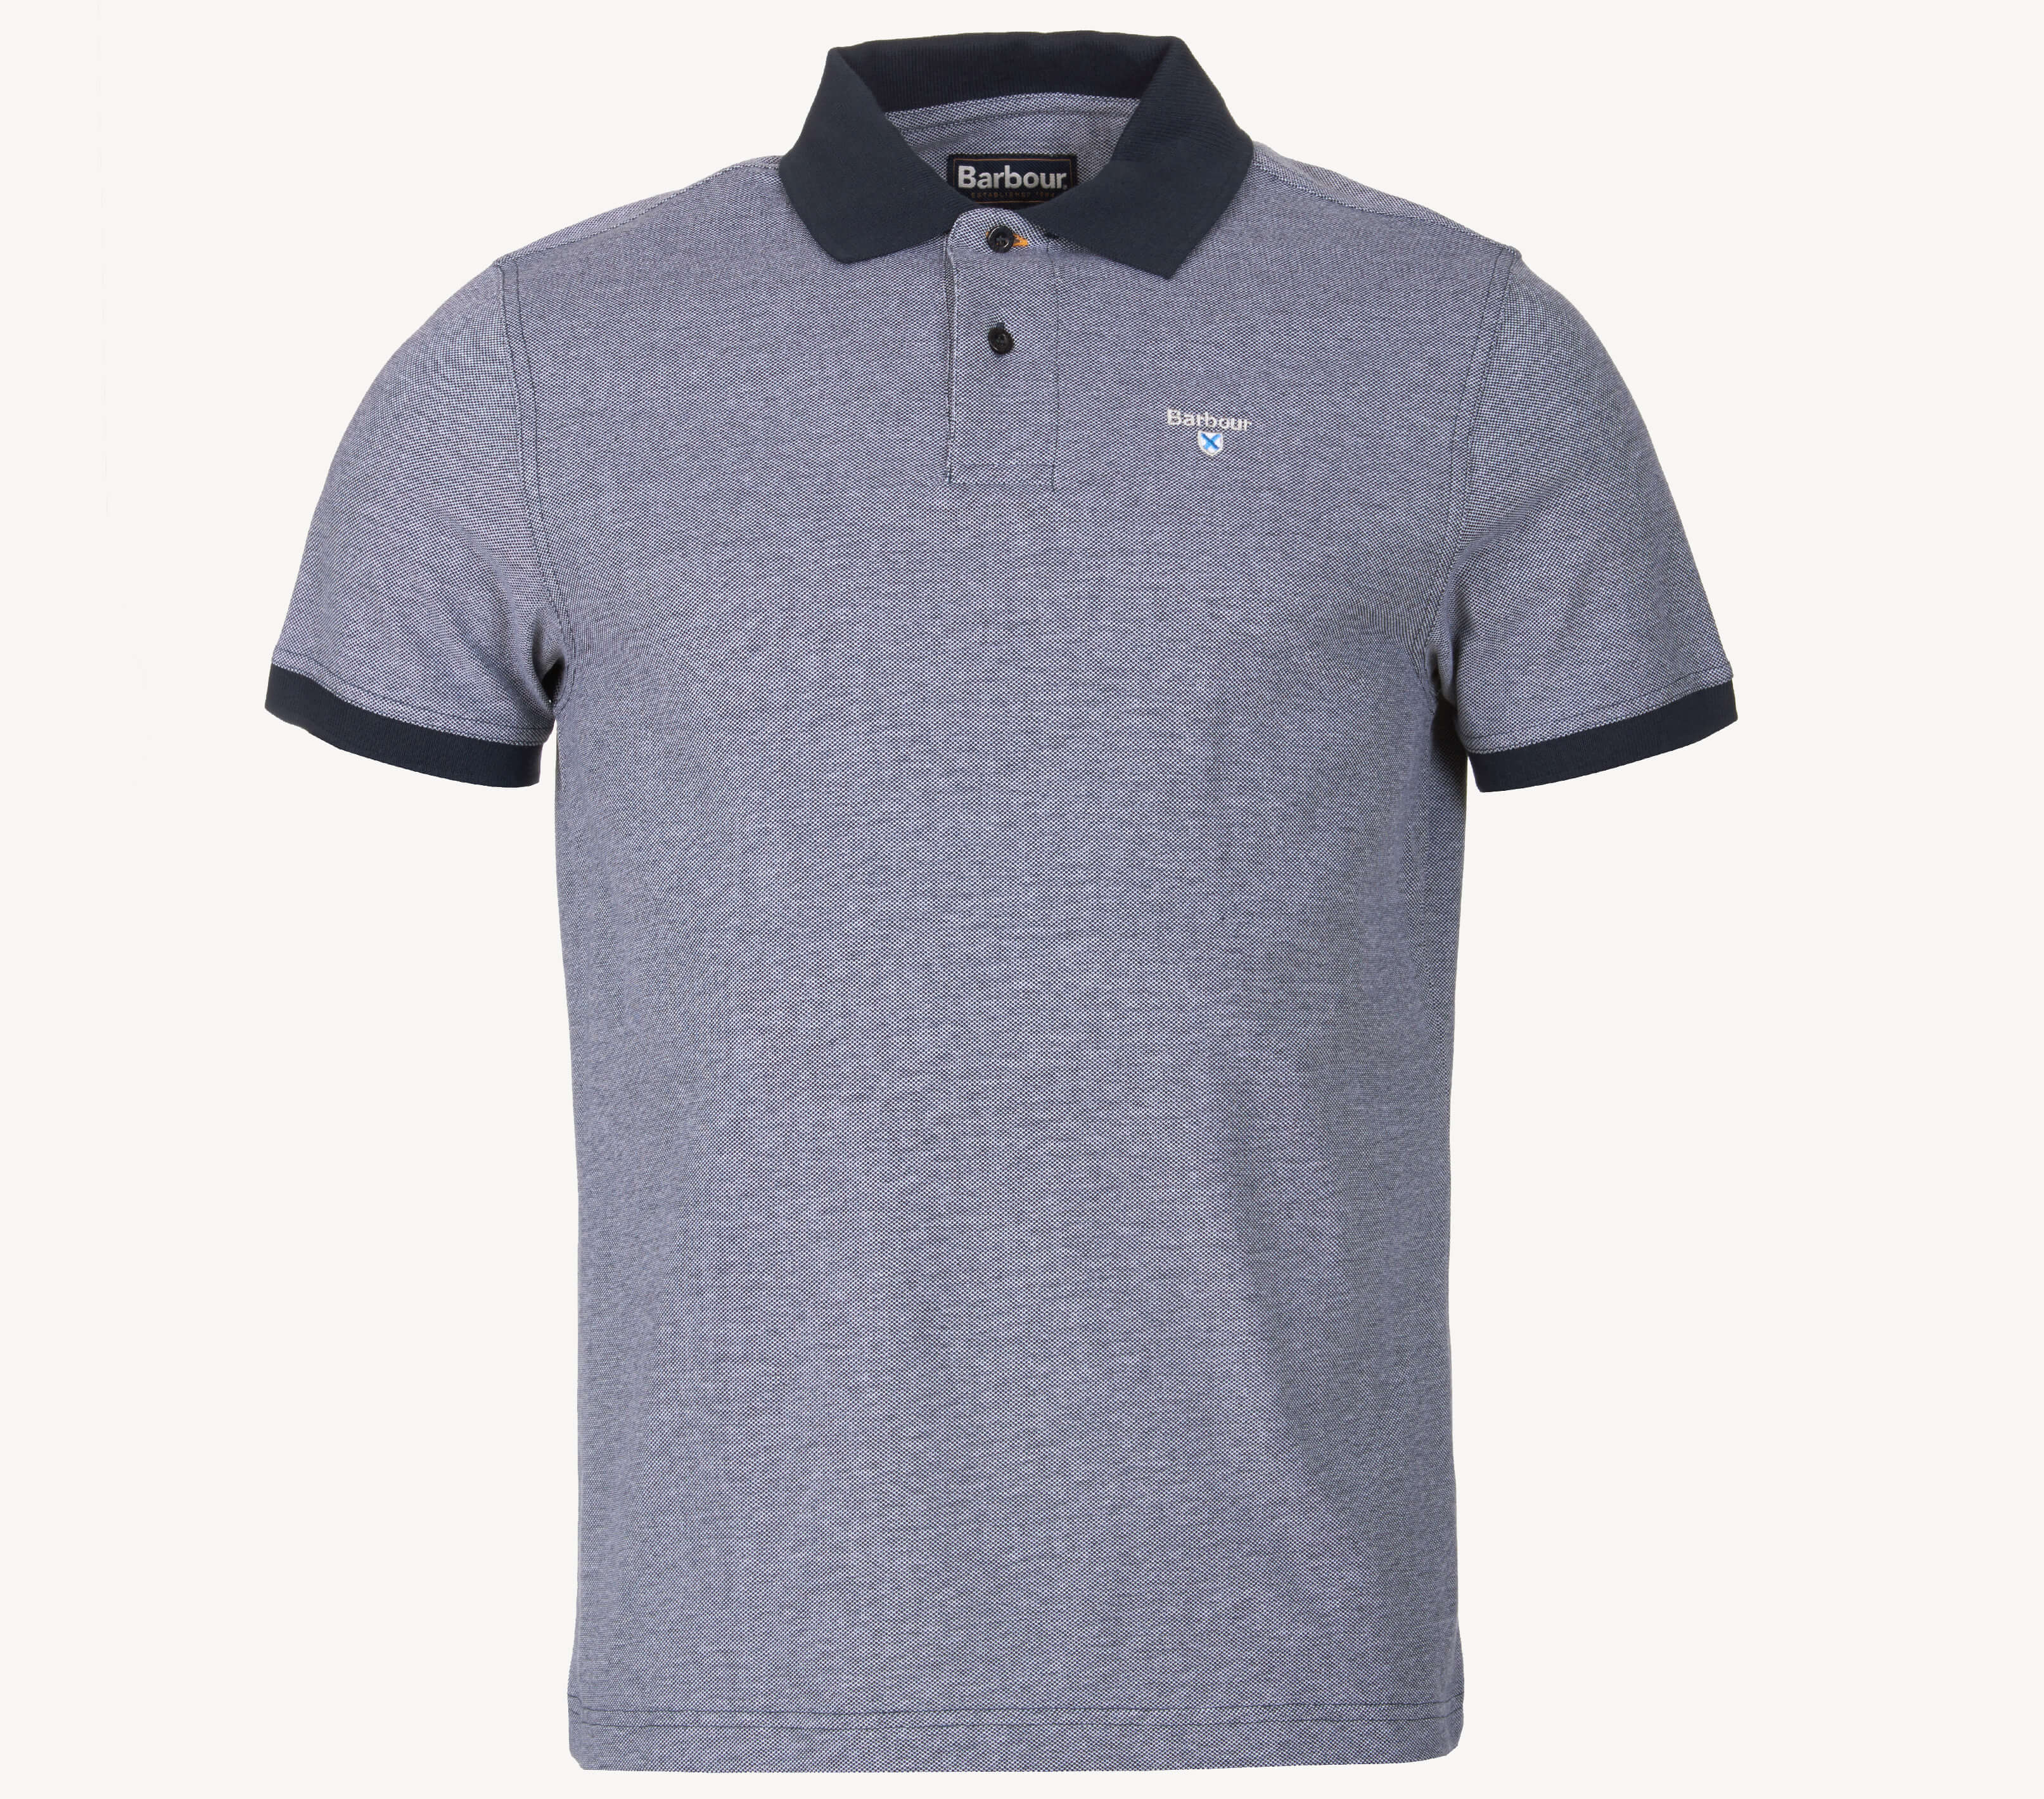 The Sport Mix Polo